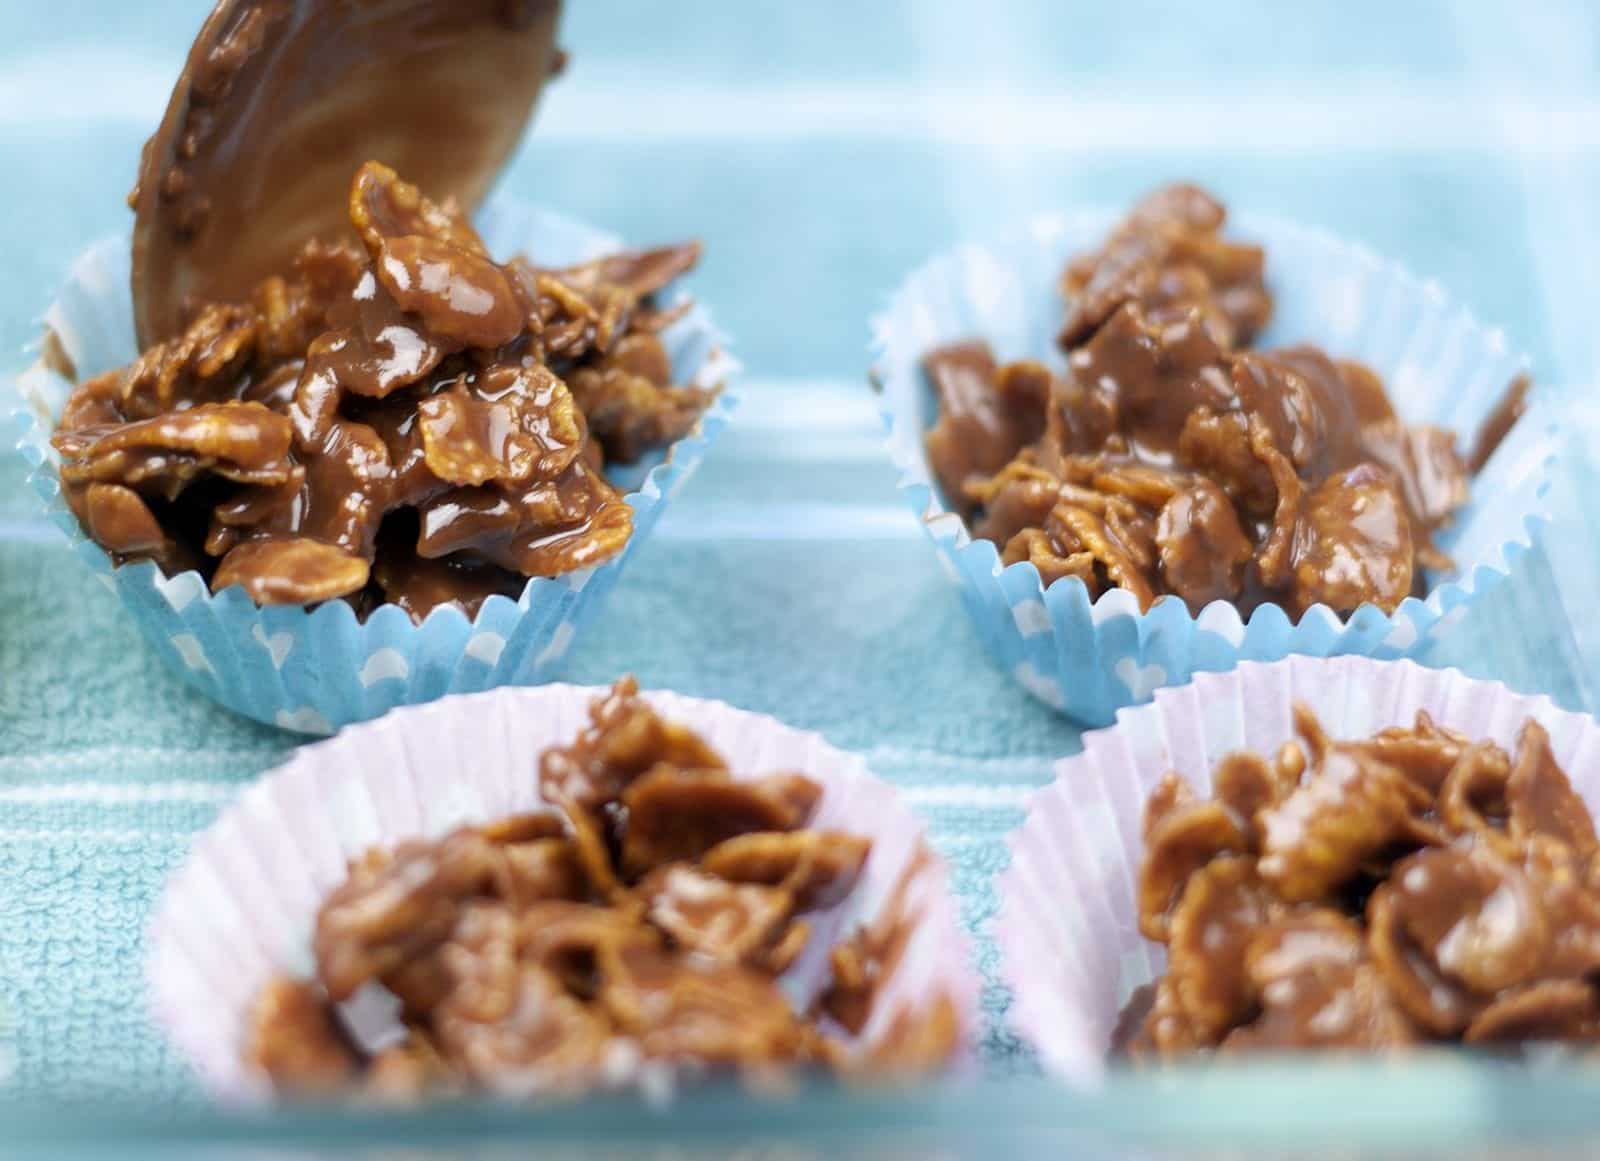 Chocolate cornflake cup cakes. What a recipe! So simple you can make it with the kids! Chocolate, sugar,butter and cornflakes. What could be more simple! Yum! | https://theyumyumclub.com